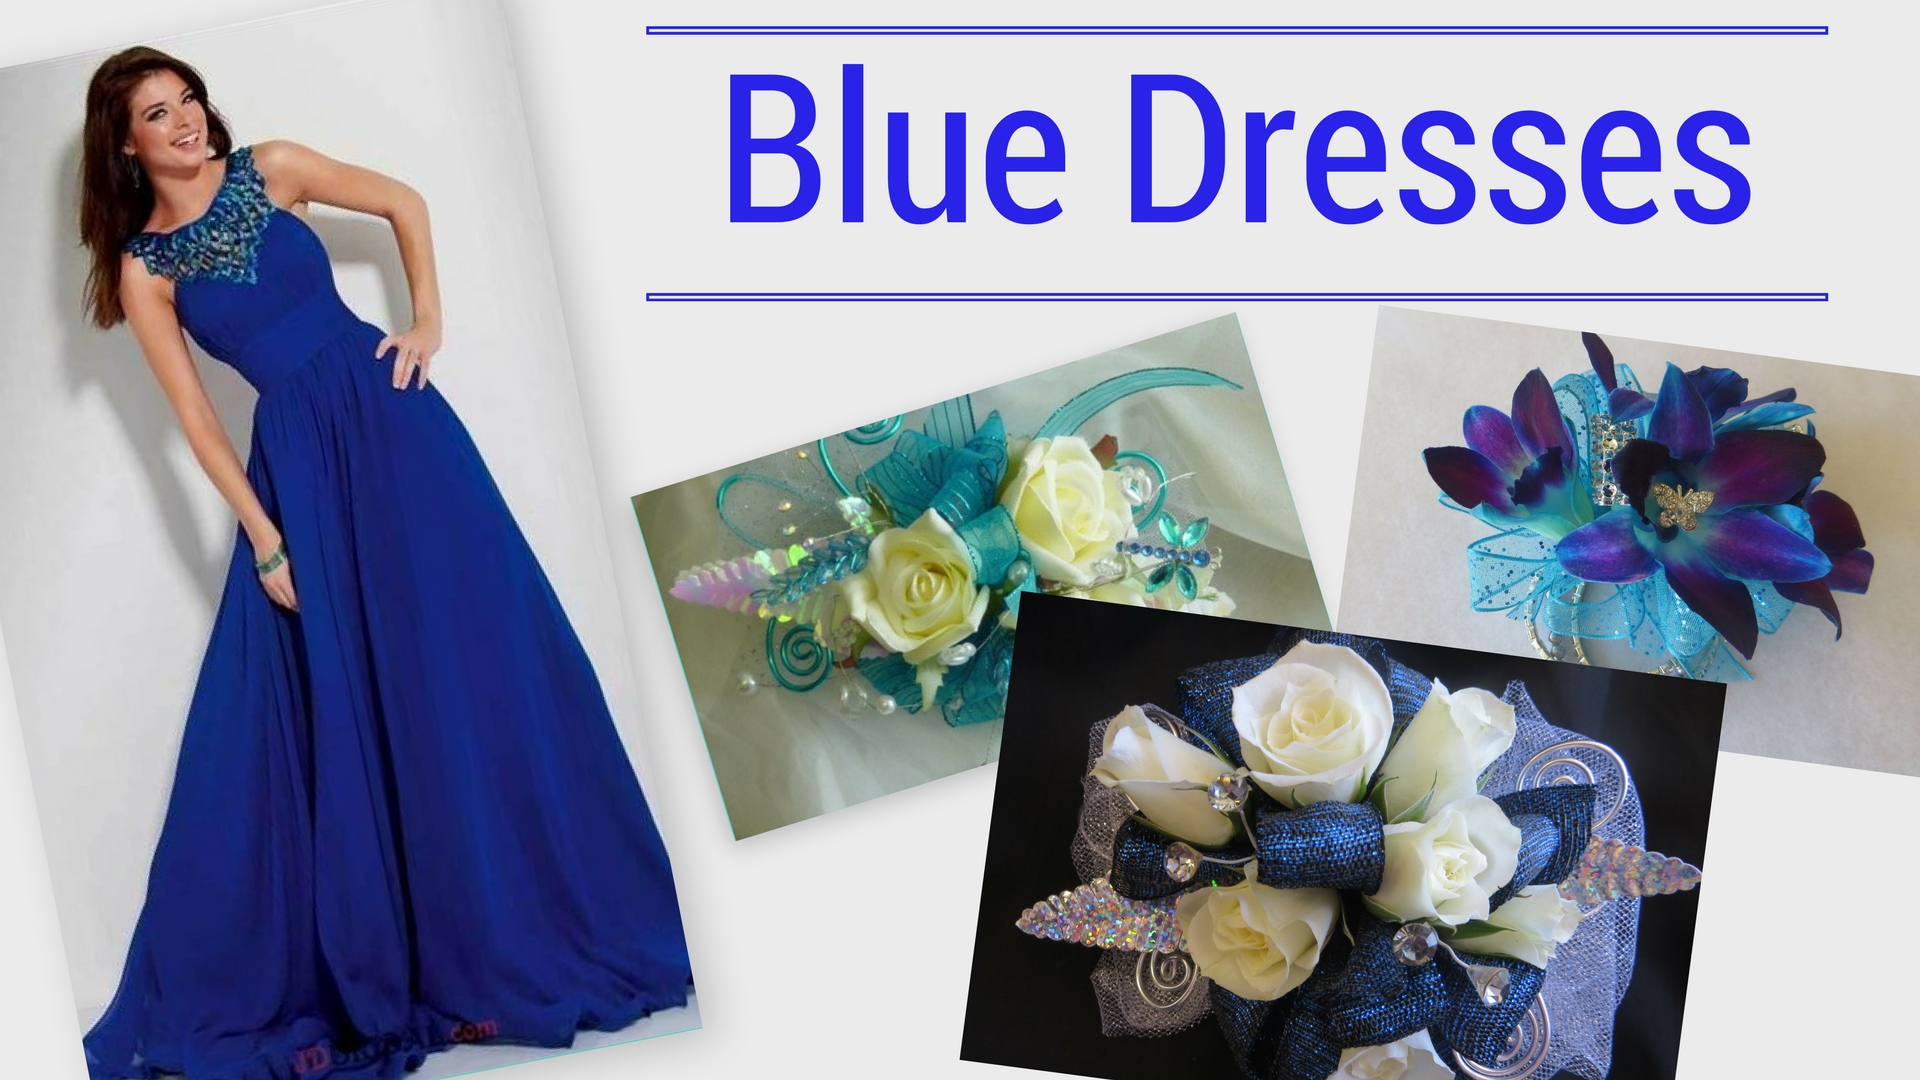 Prom 2018 Trends prom corsage near me flower shop in pasadena tx blue dress